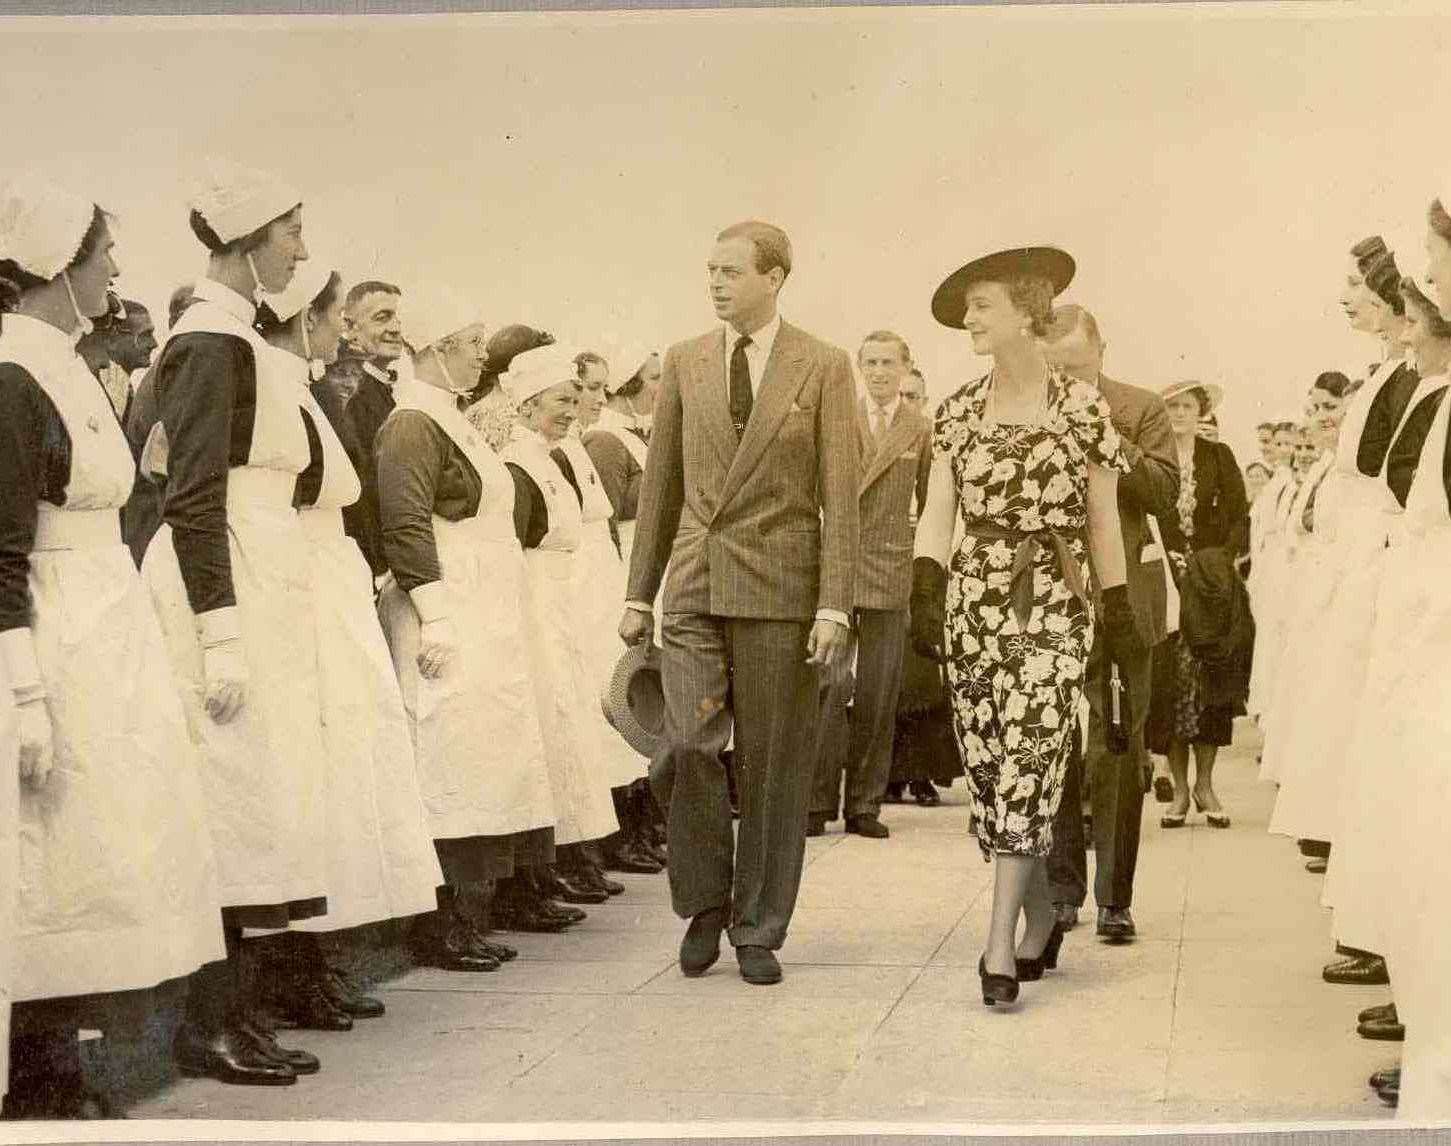 The Duke of Kent and Princess Marina at the opening of the K&C Hospital in 1937